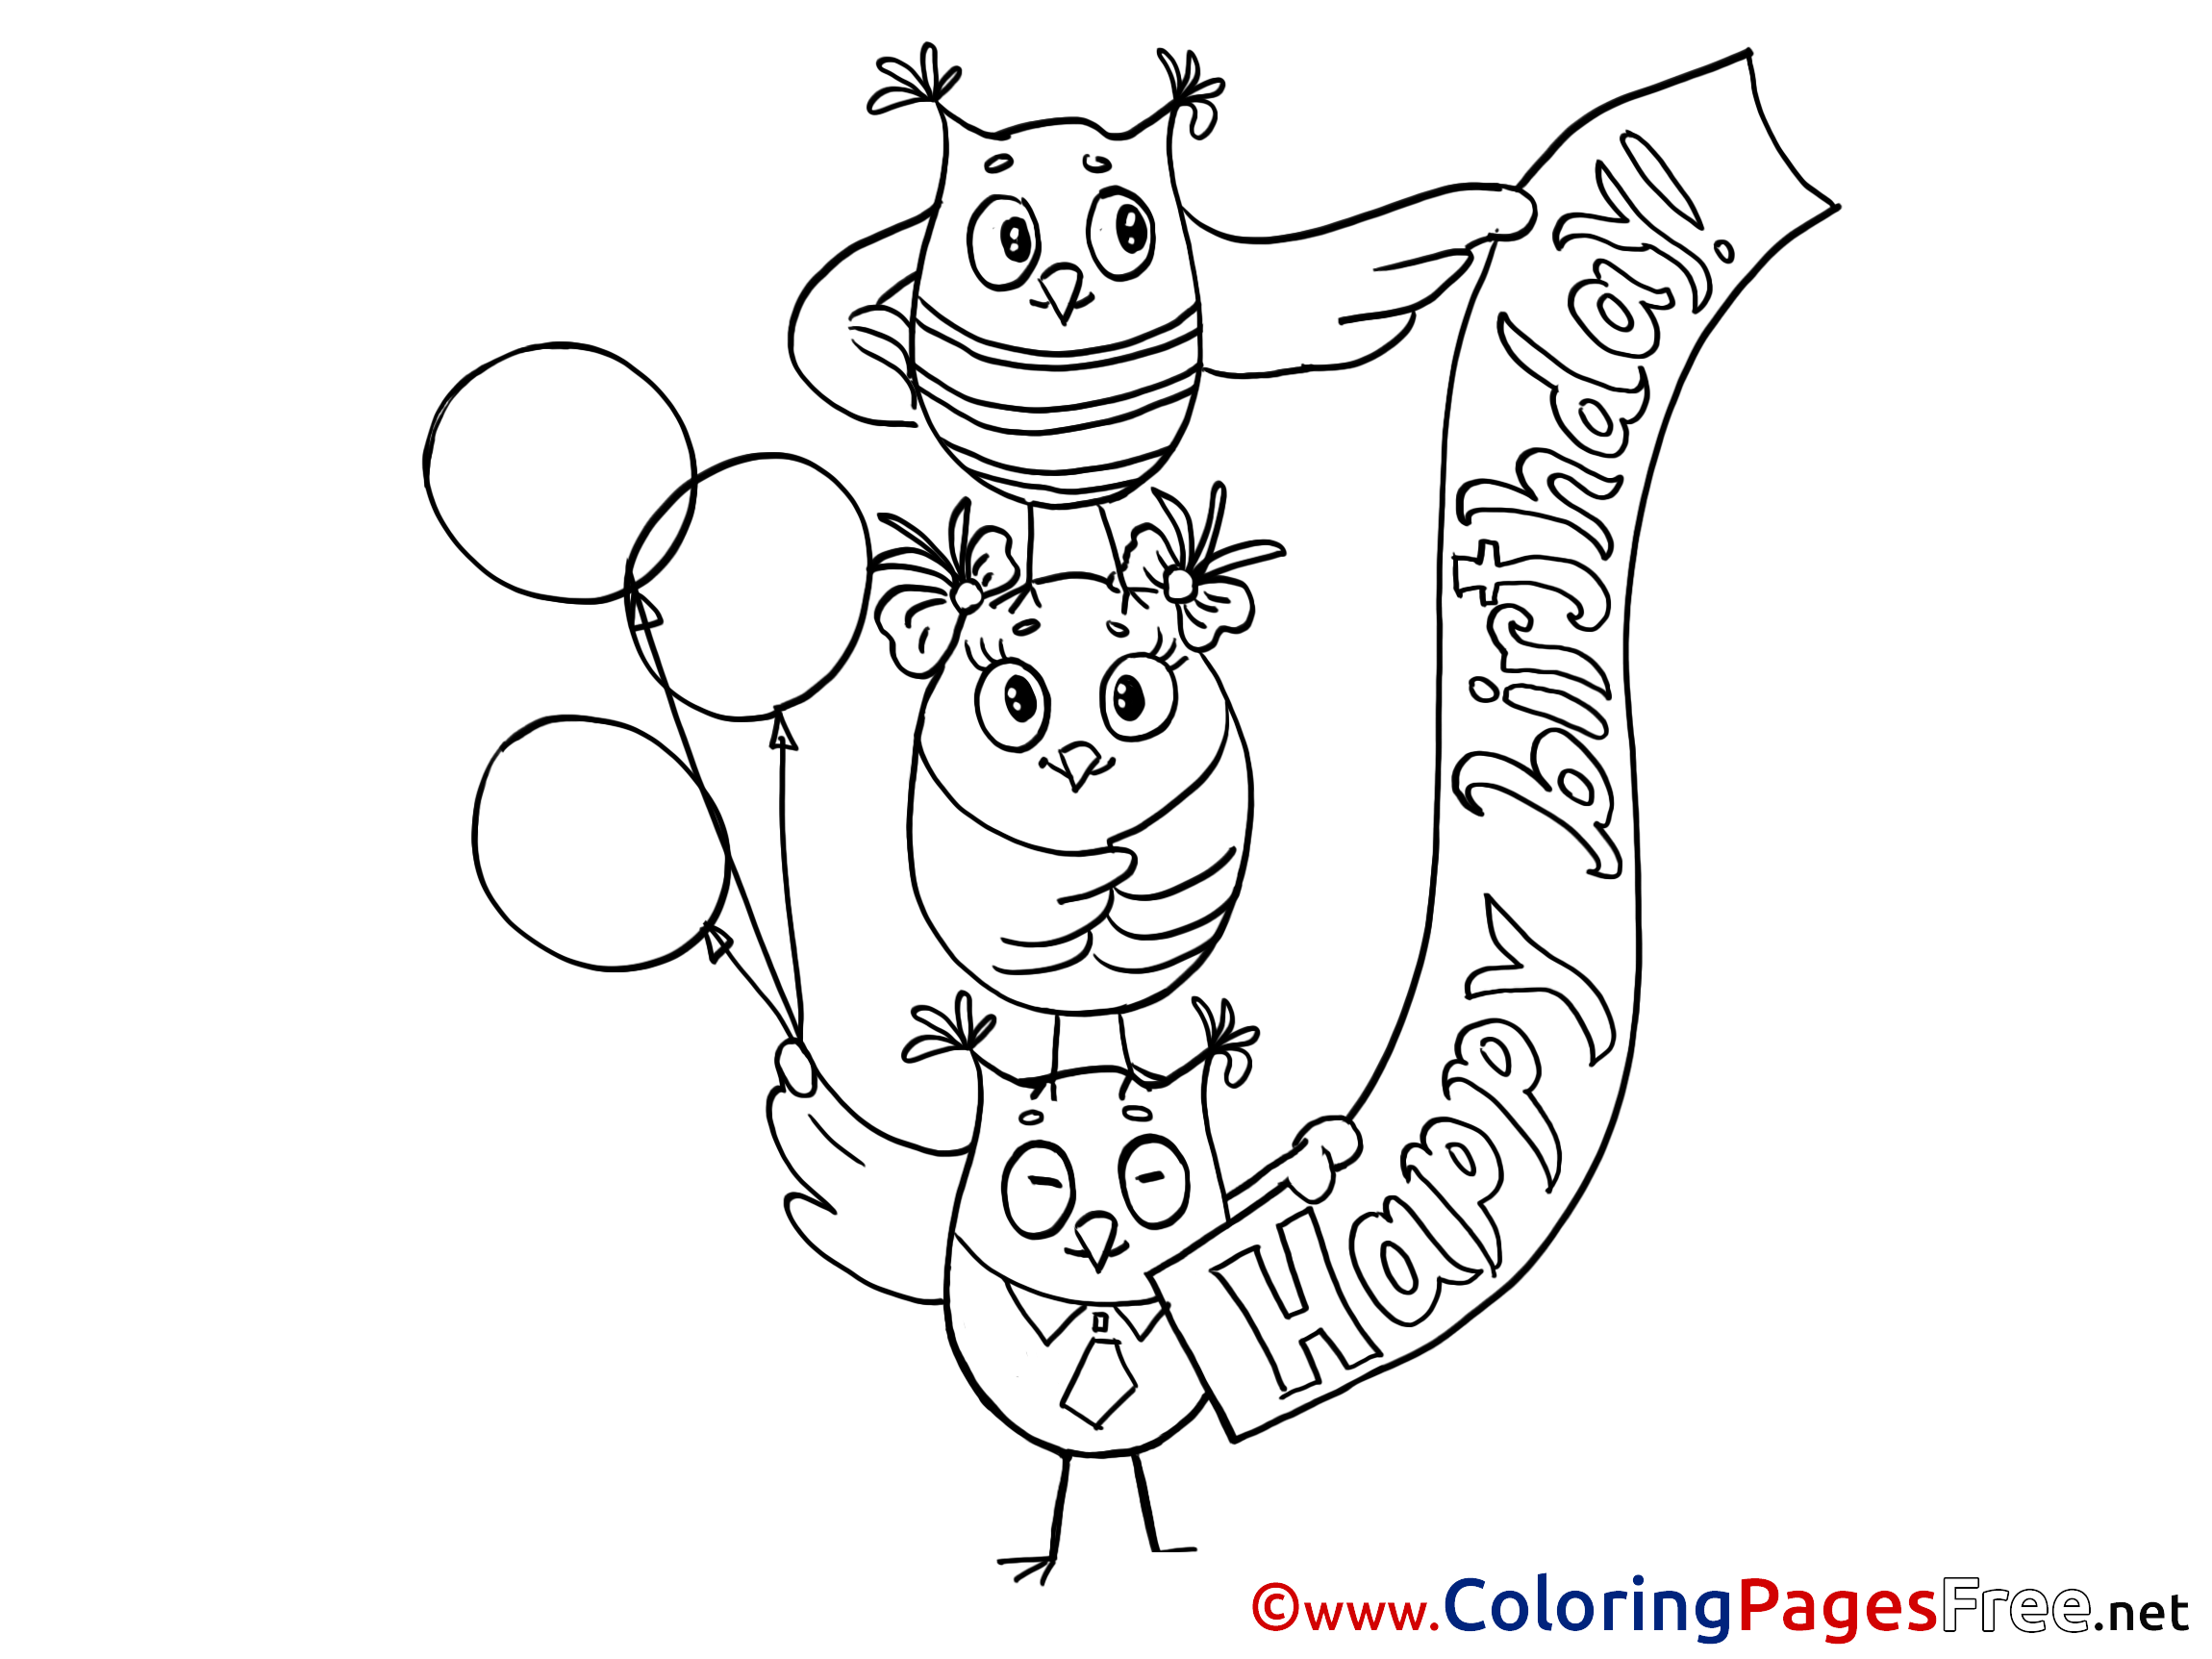 owl-download-birthday-coloring-pages